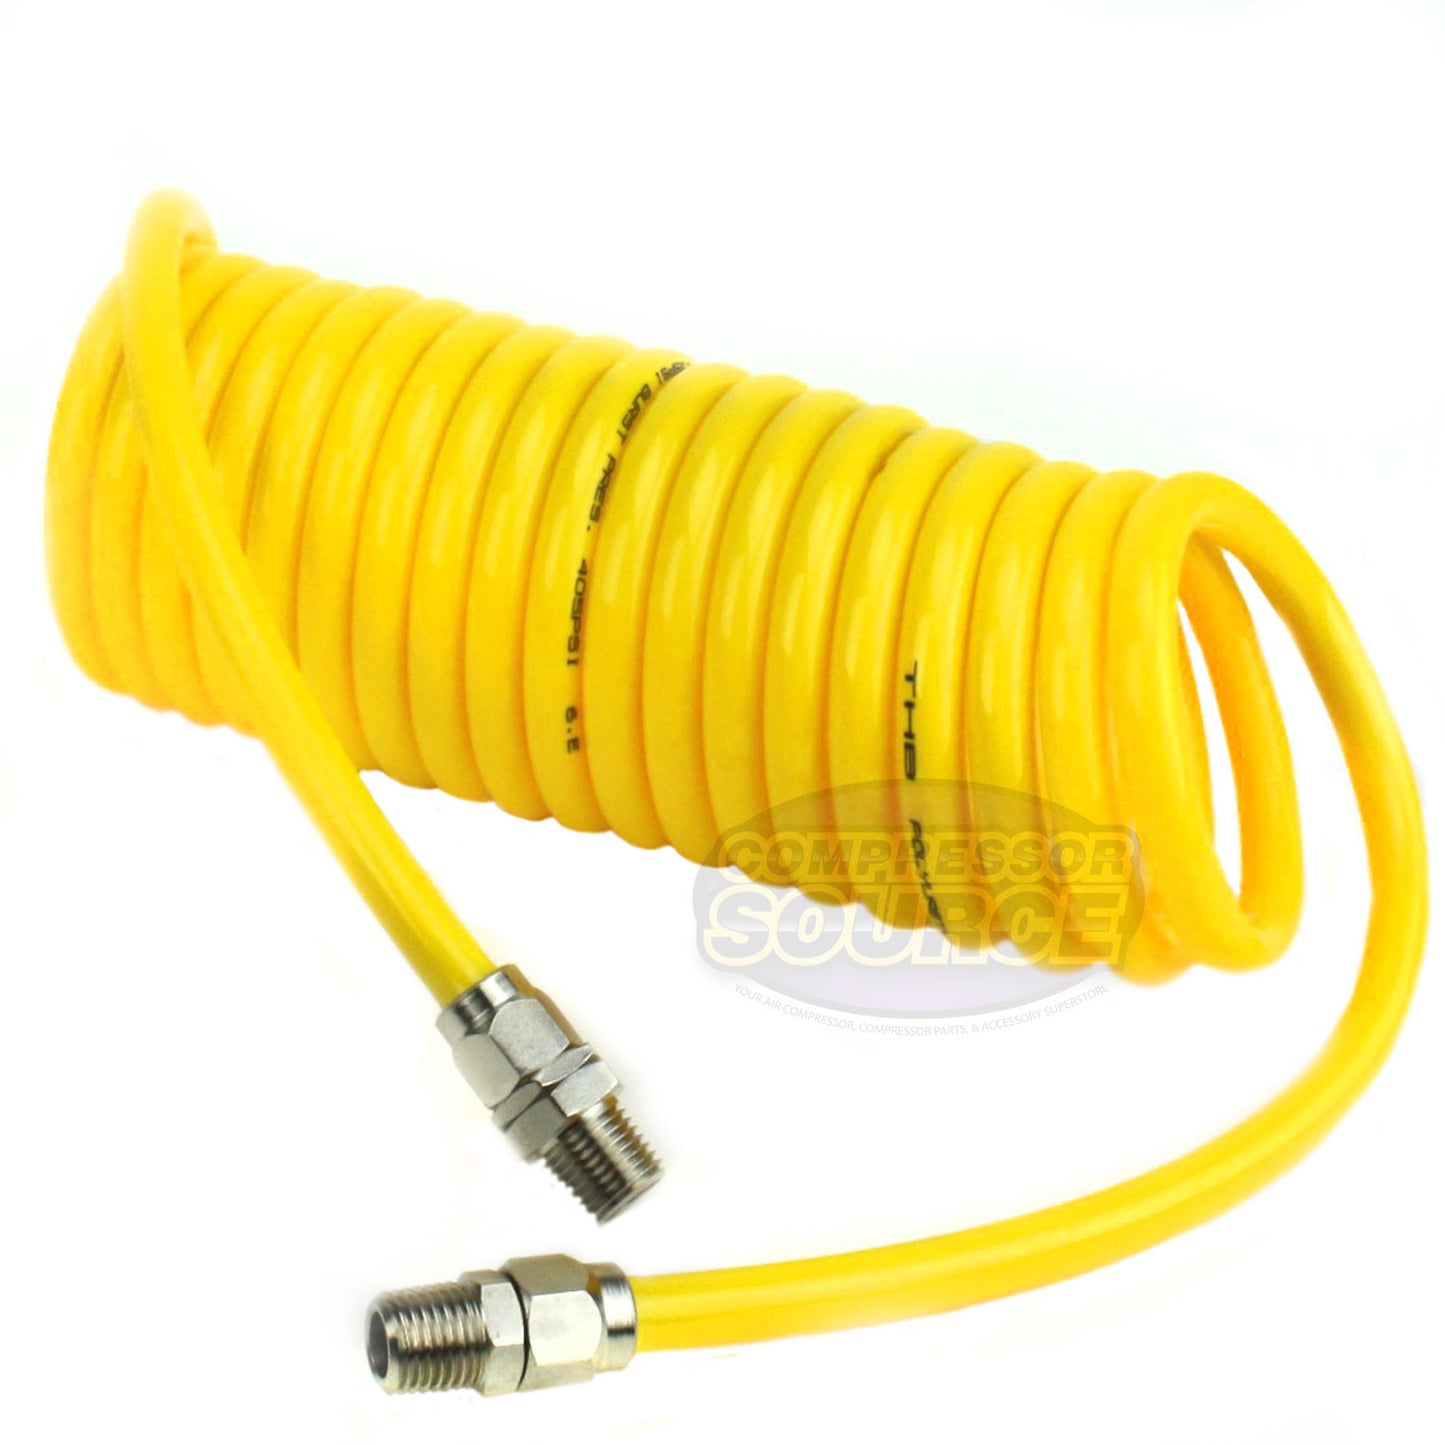 Premium 1/4" x 15' Air Compressor Coil Hose Polyurethane Coiled With Swivel End Yellow